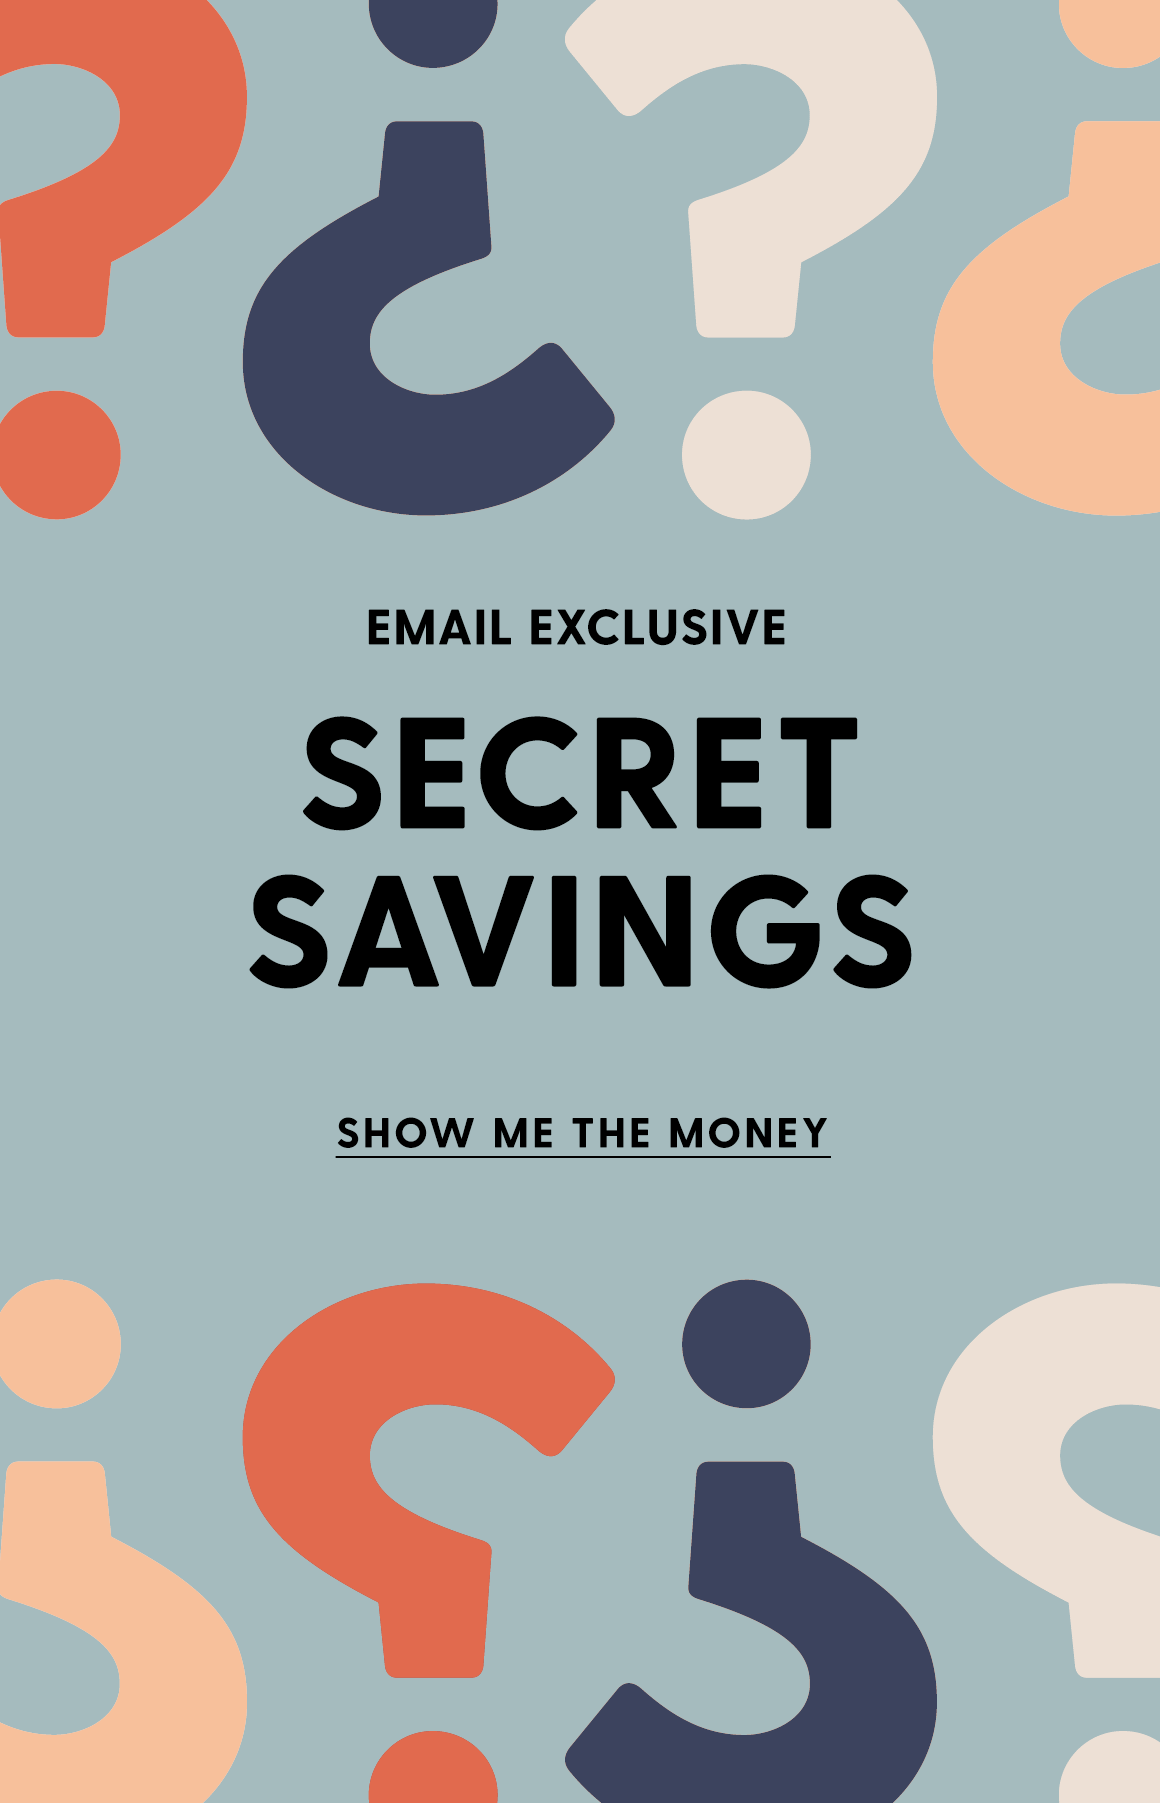 EMAIL EXCLUSIVE SECRET SAVINGS. SHOW ME THE MONEY.